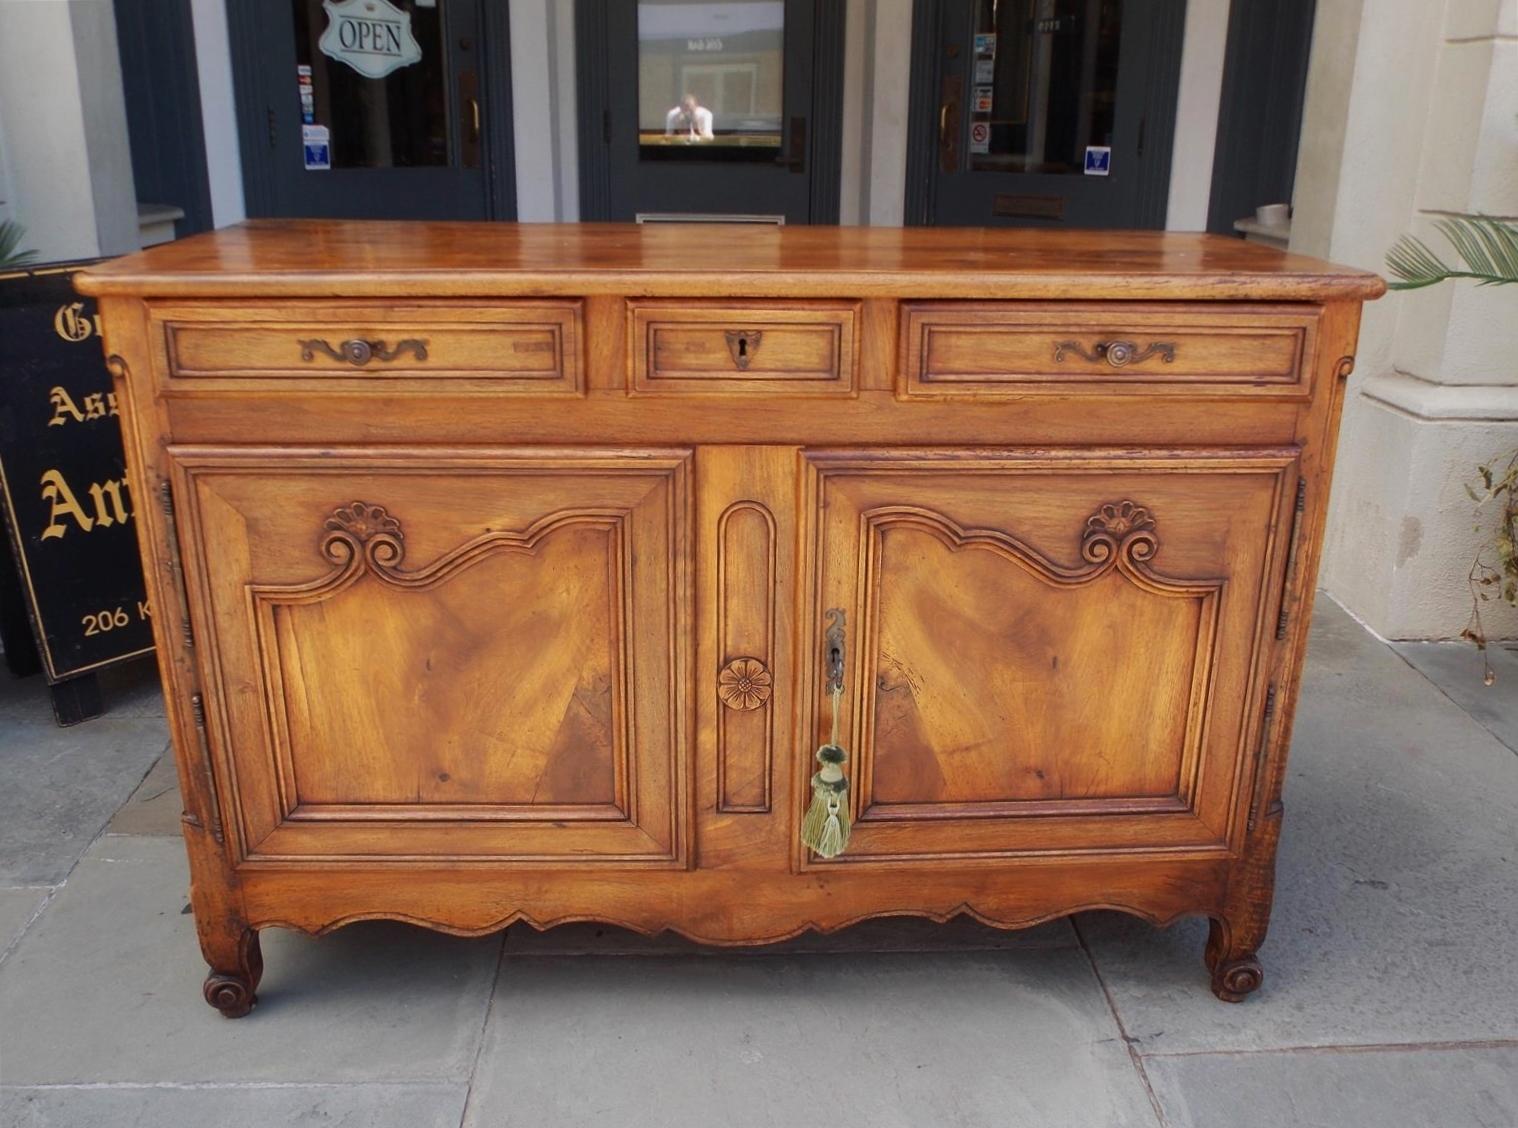 French Provincial cherry server with a carved molded edge top, three upper case drawers with the original hardware, escutcheon, and key, two lower case hinged flanking decorative molded floral doors revealing a centered fitted interior shelf, carved